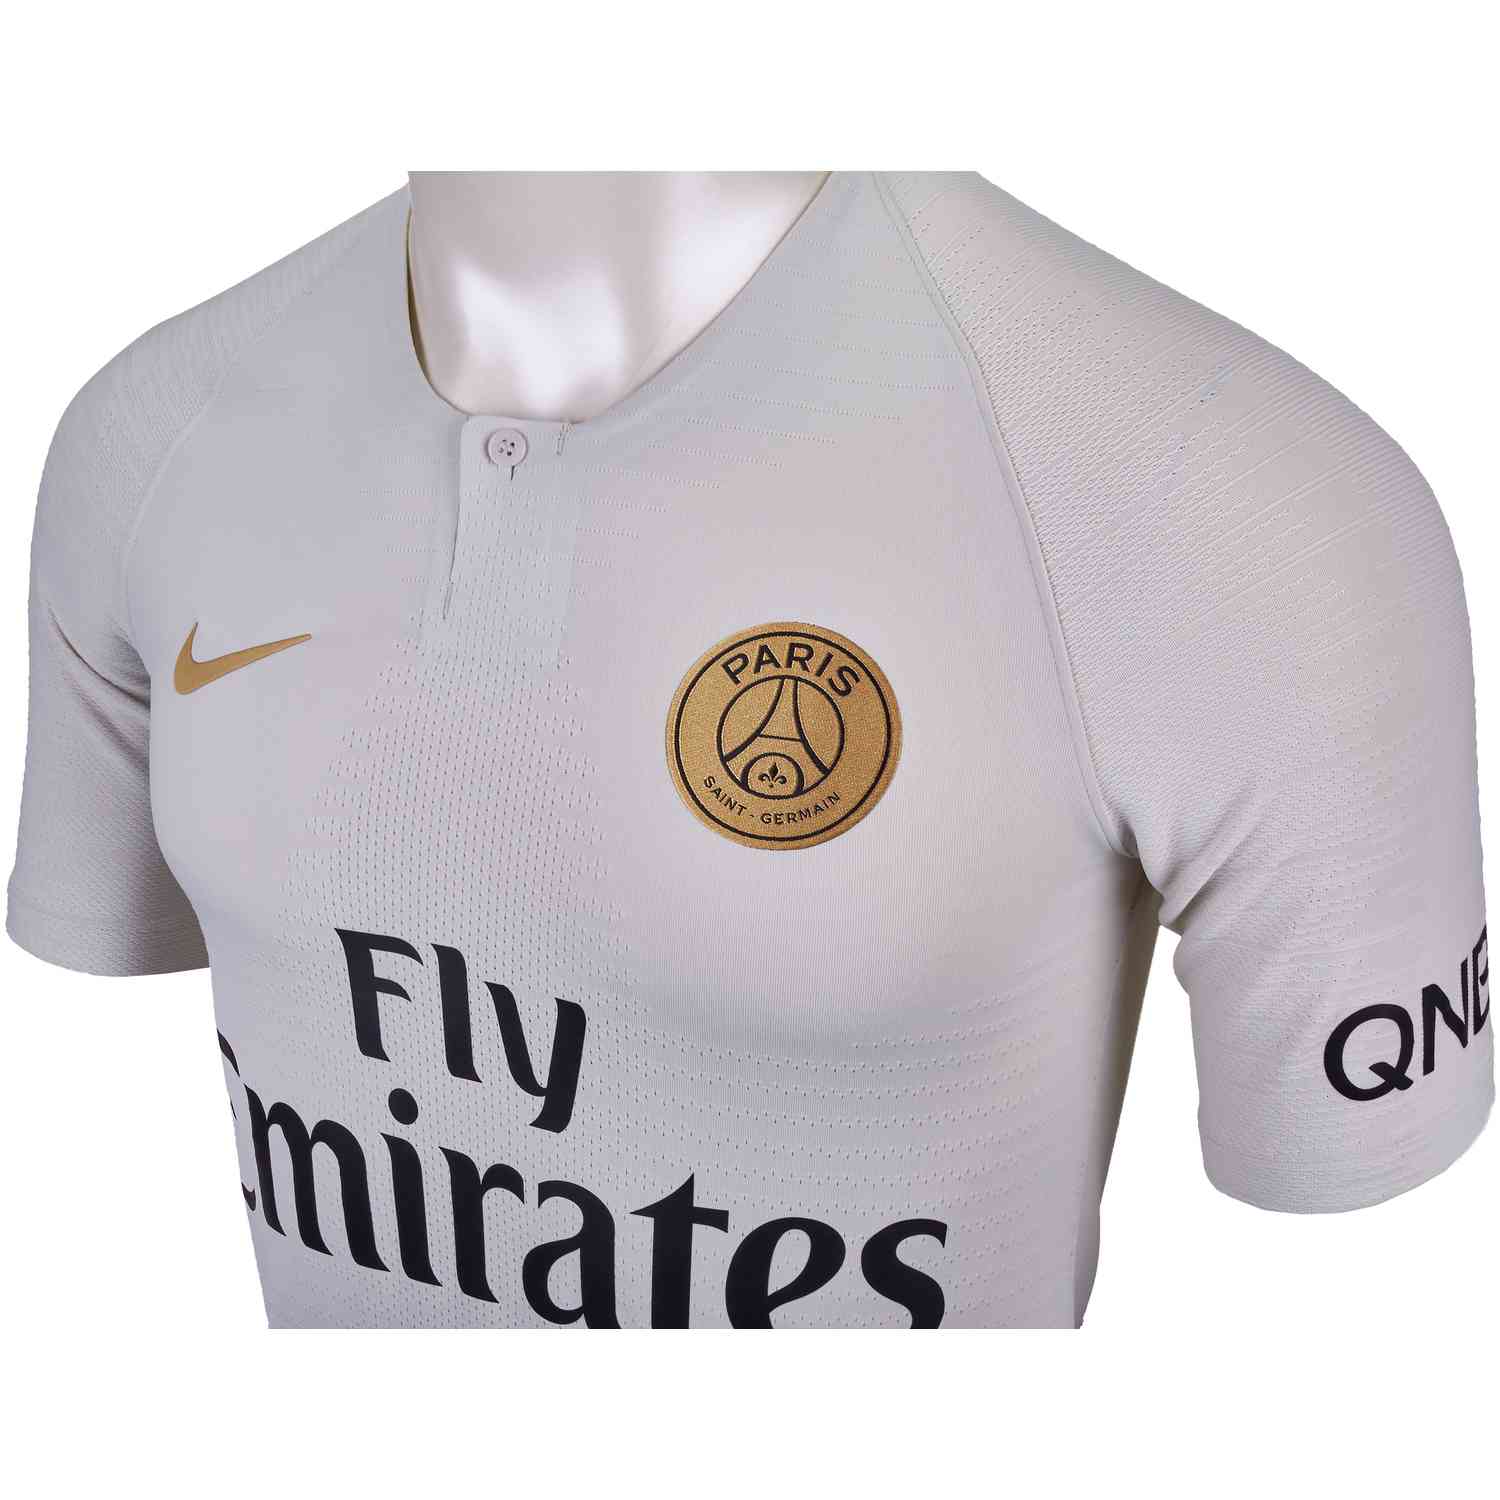 NIKE PSG 2006 AWAY L/S AUTHENTIC WHITE JERSEY